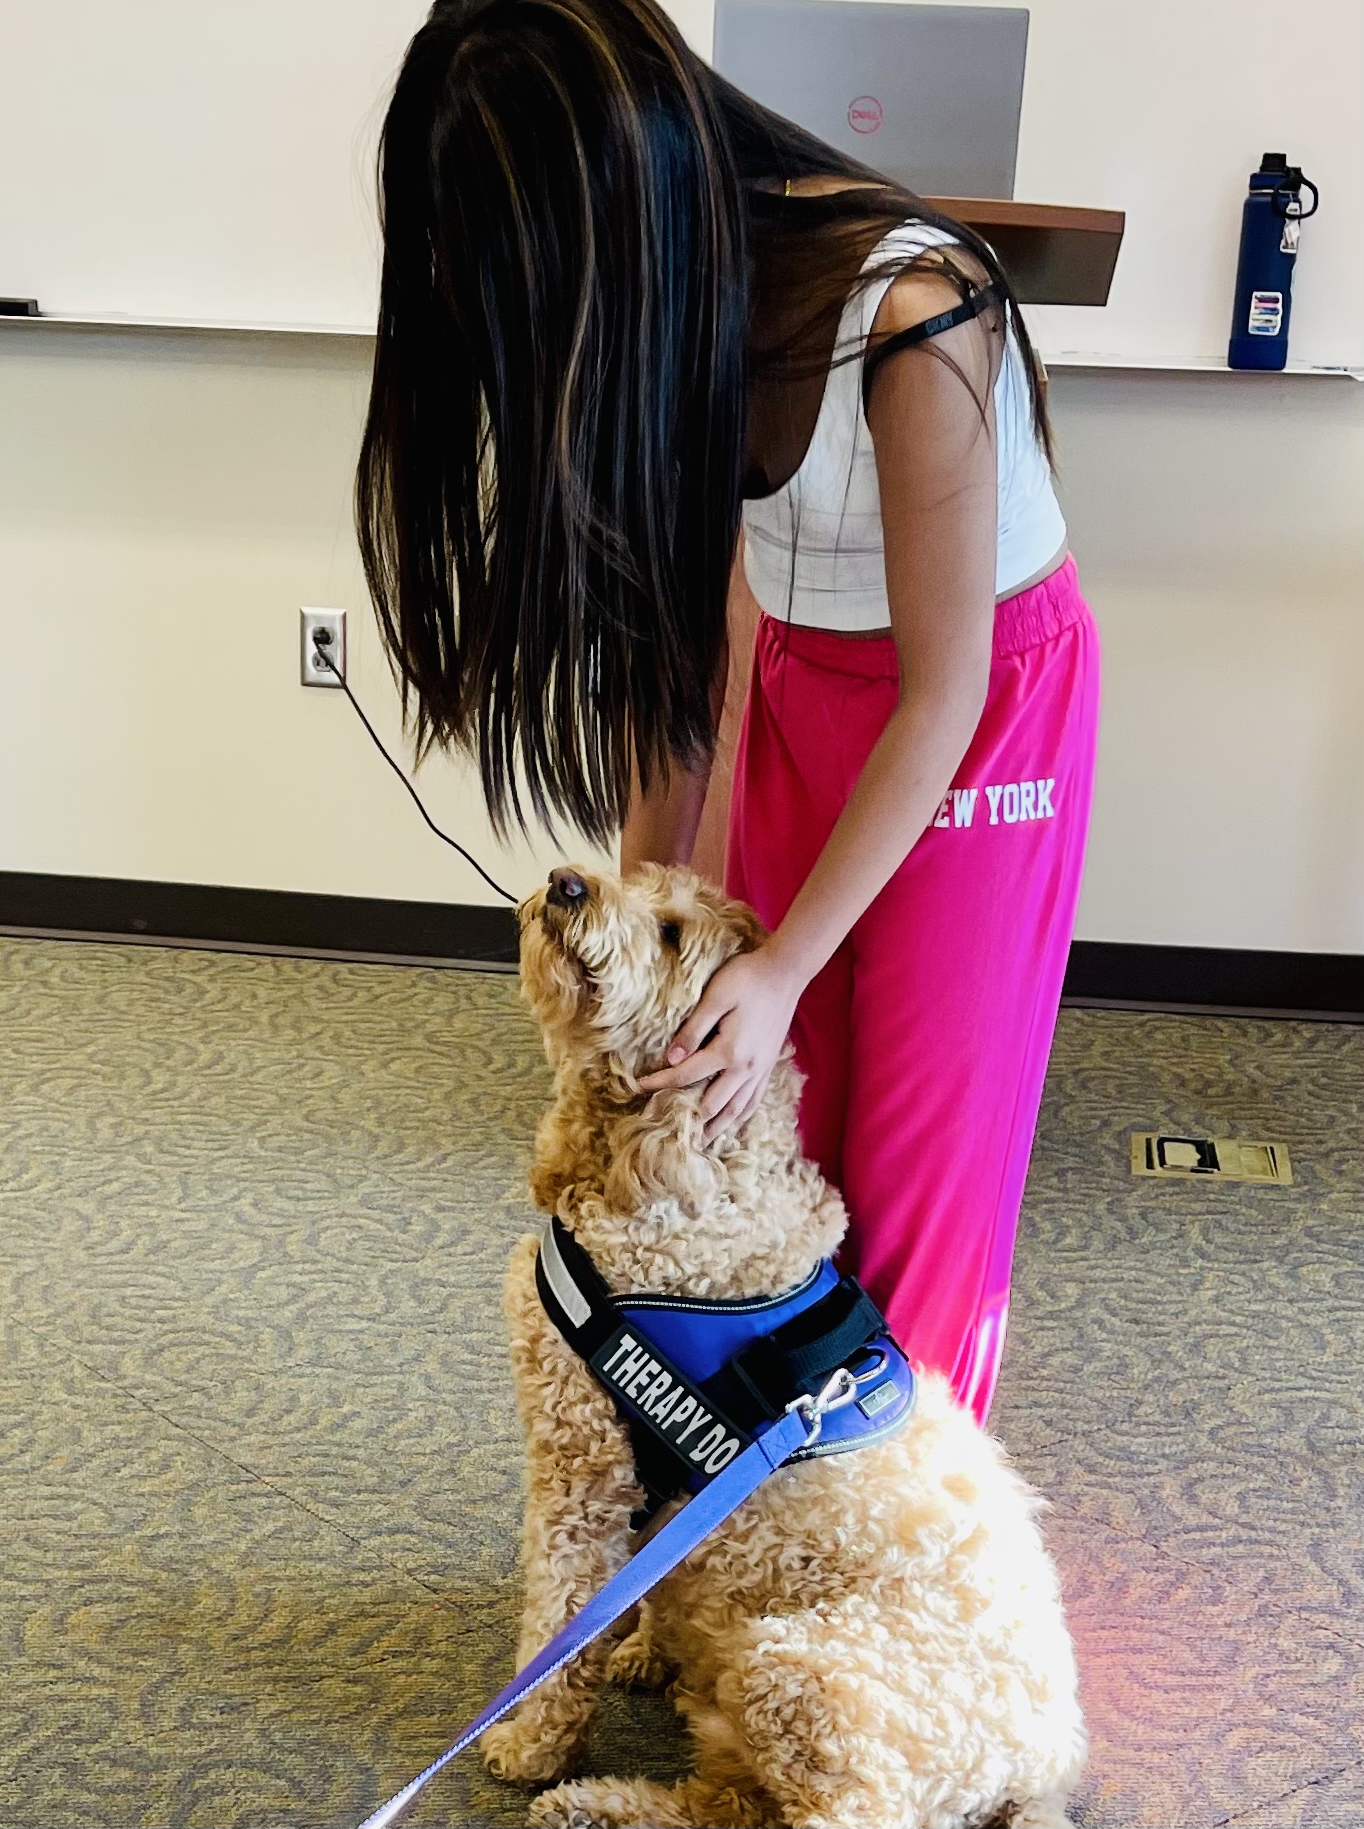 teen wearing pink pants pets a labradoodle dog that wears a blue harness